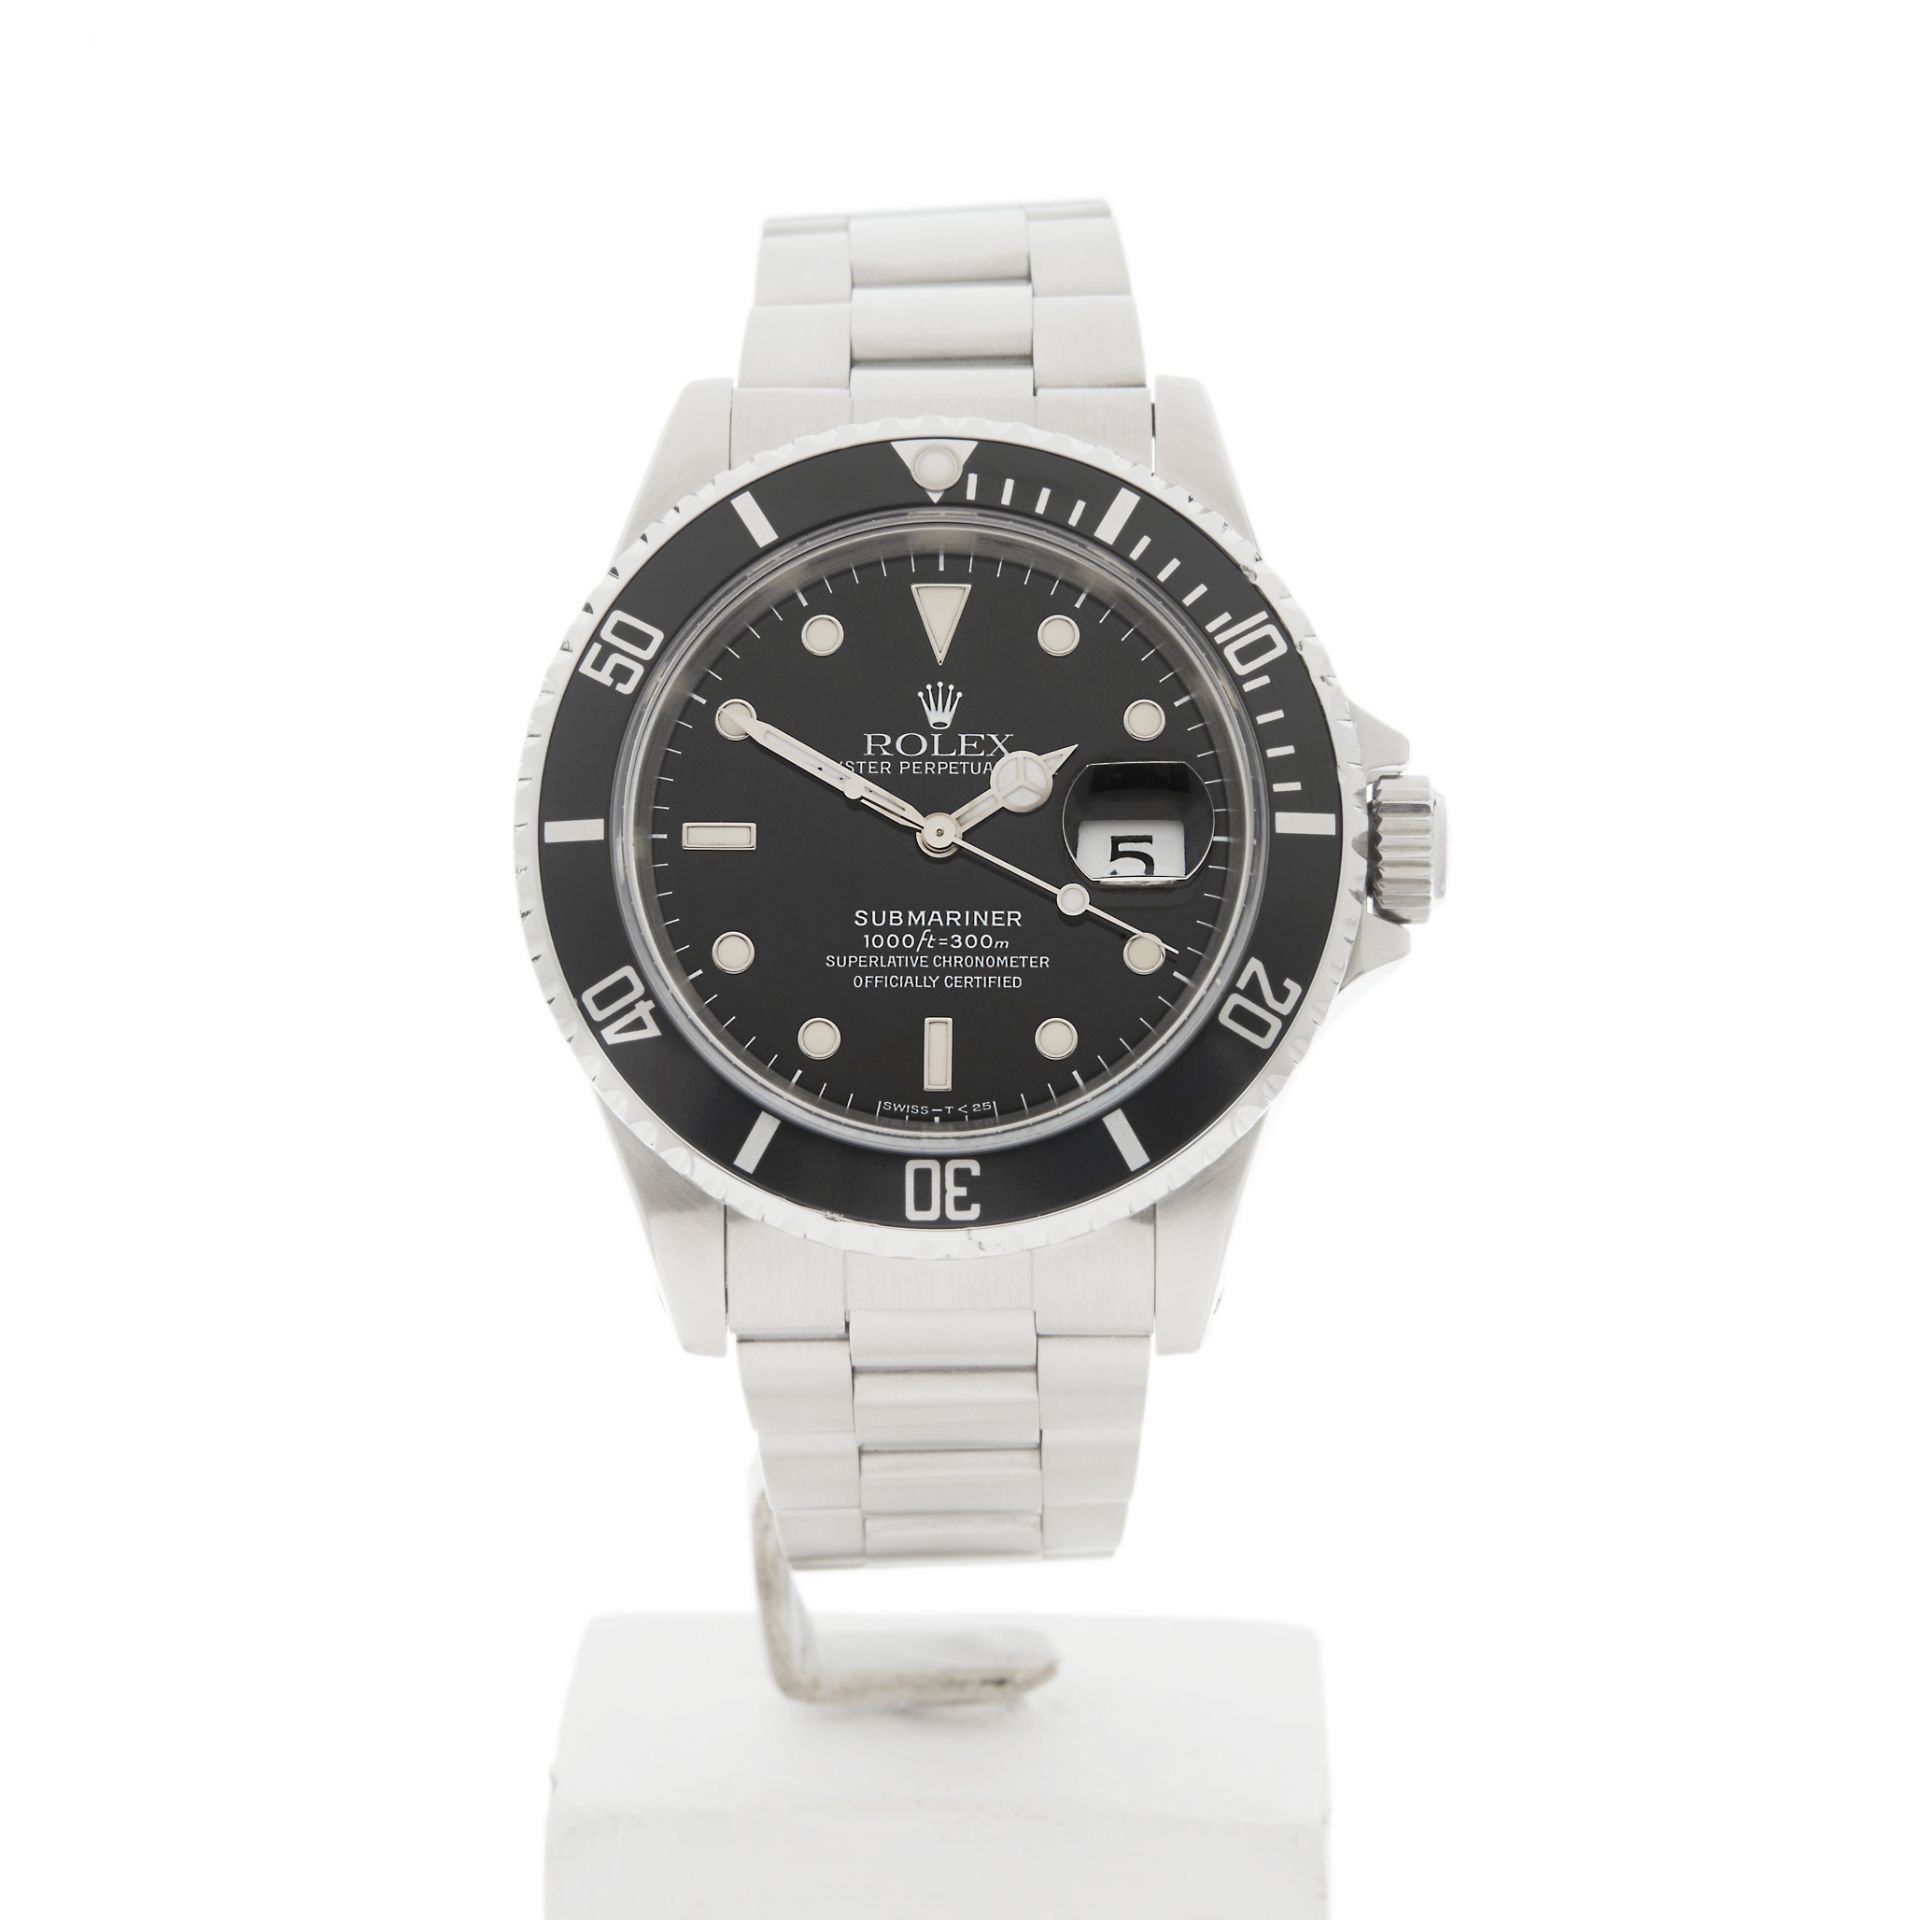 Rolex Submariner 40mm Stainless Steel - 16610 - Image 2 of 9